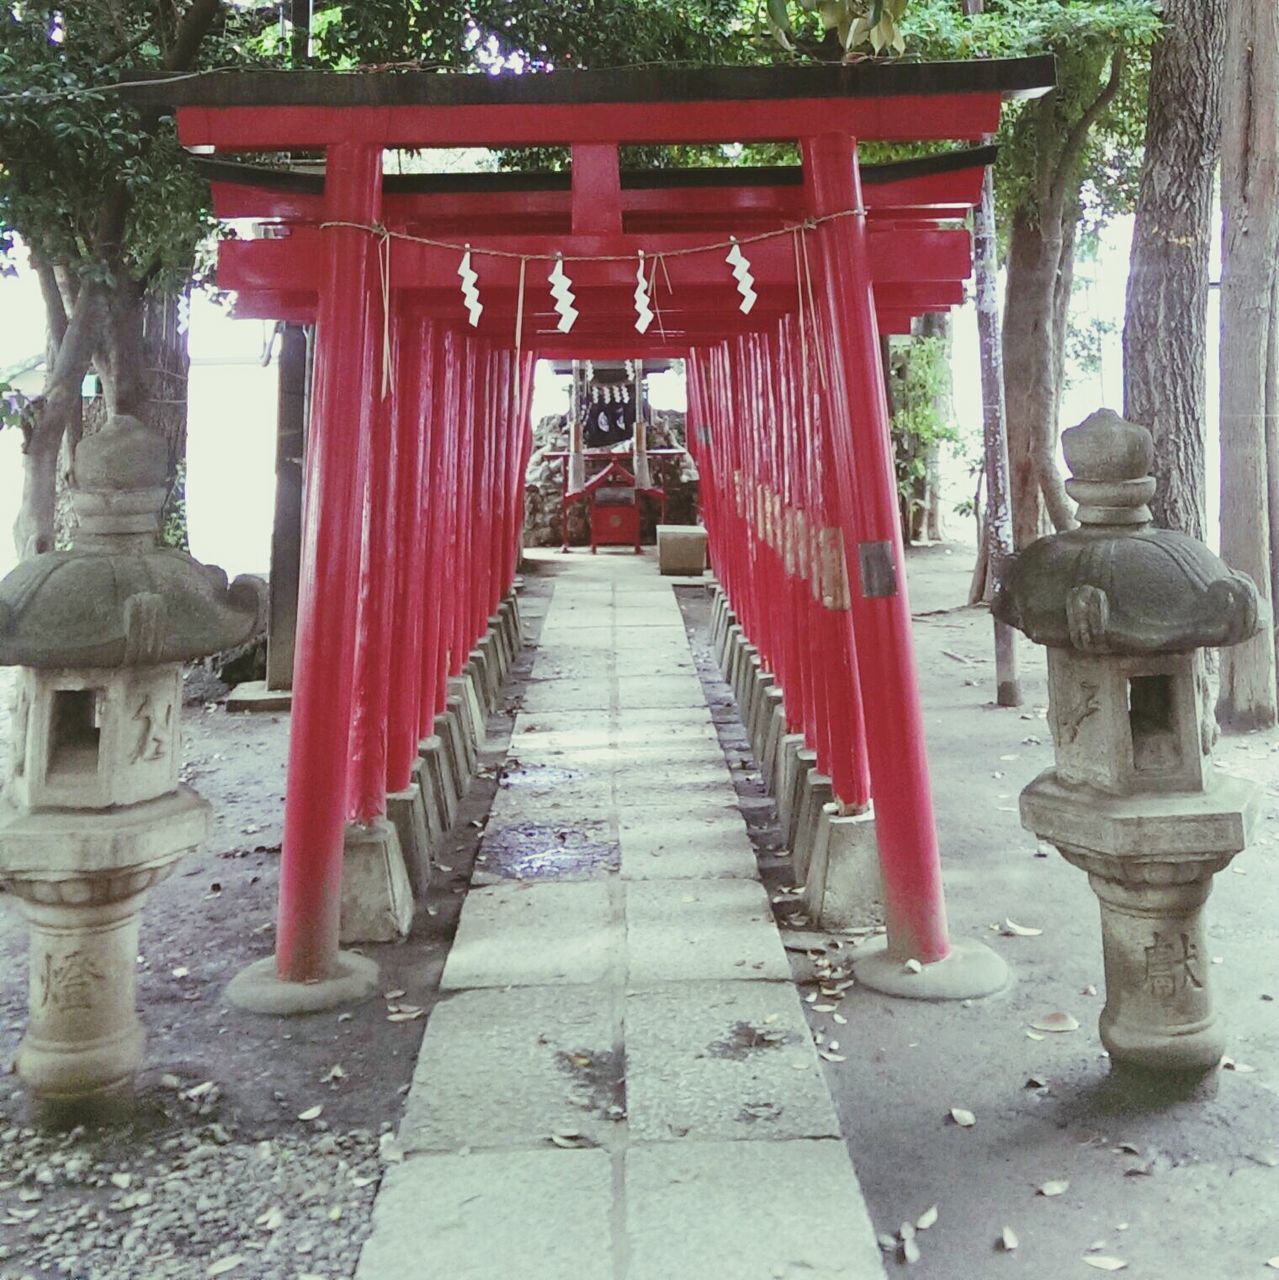 red, religion, built structure, temple - building, tree, architecture, spirituality, place of worship, steps, architectural column, in a row, tradition, railing, temple, day, cultures, culture, sunlight, shrine